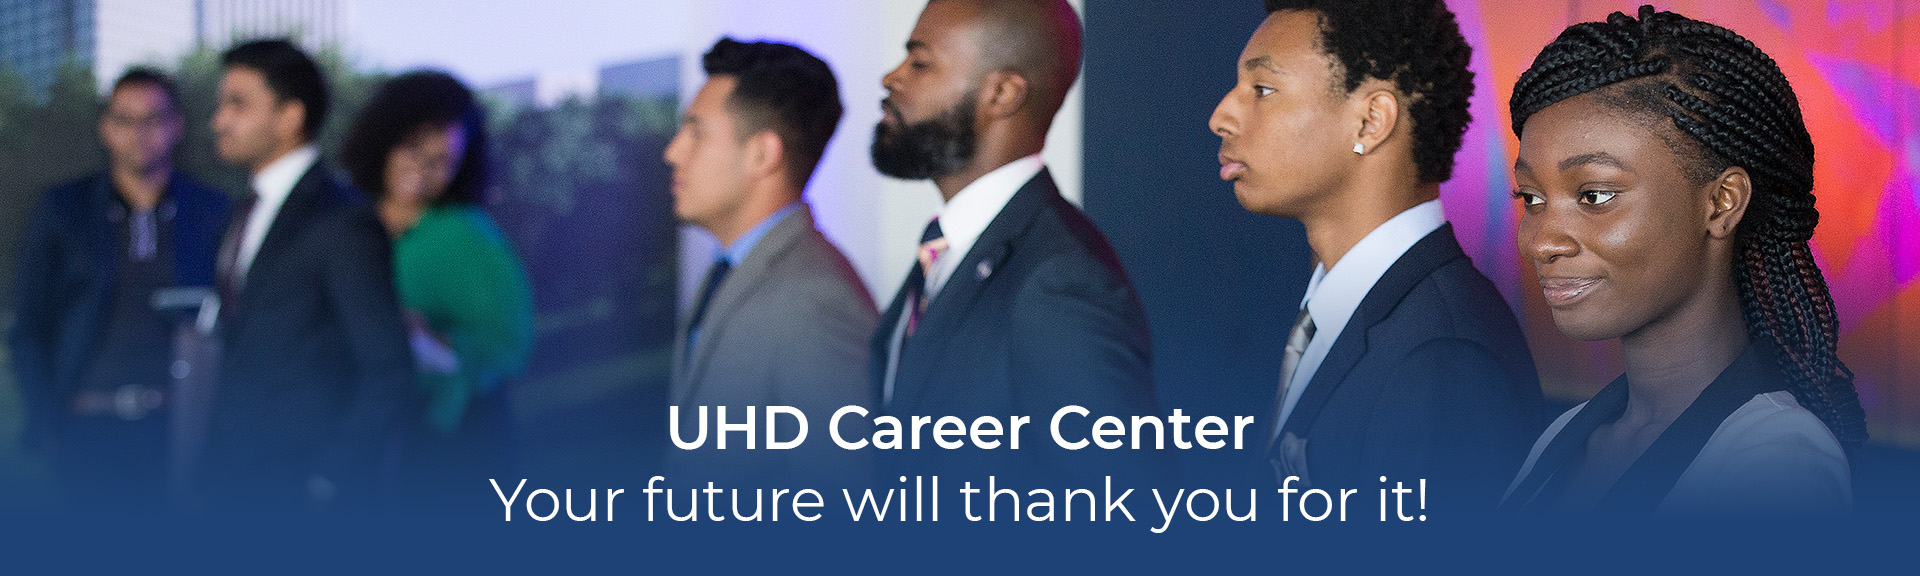 Main career center banner - Welcome